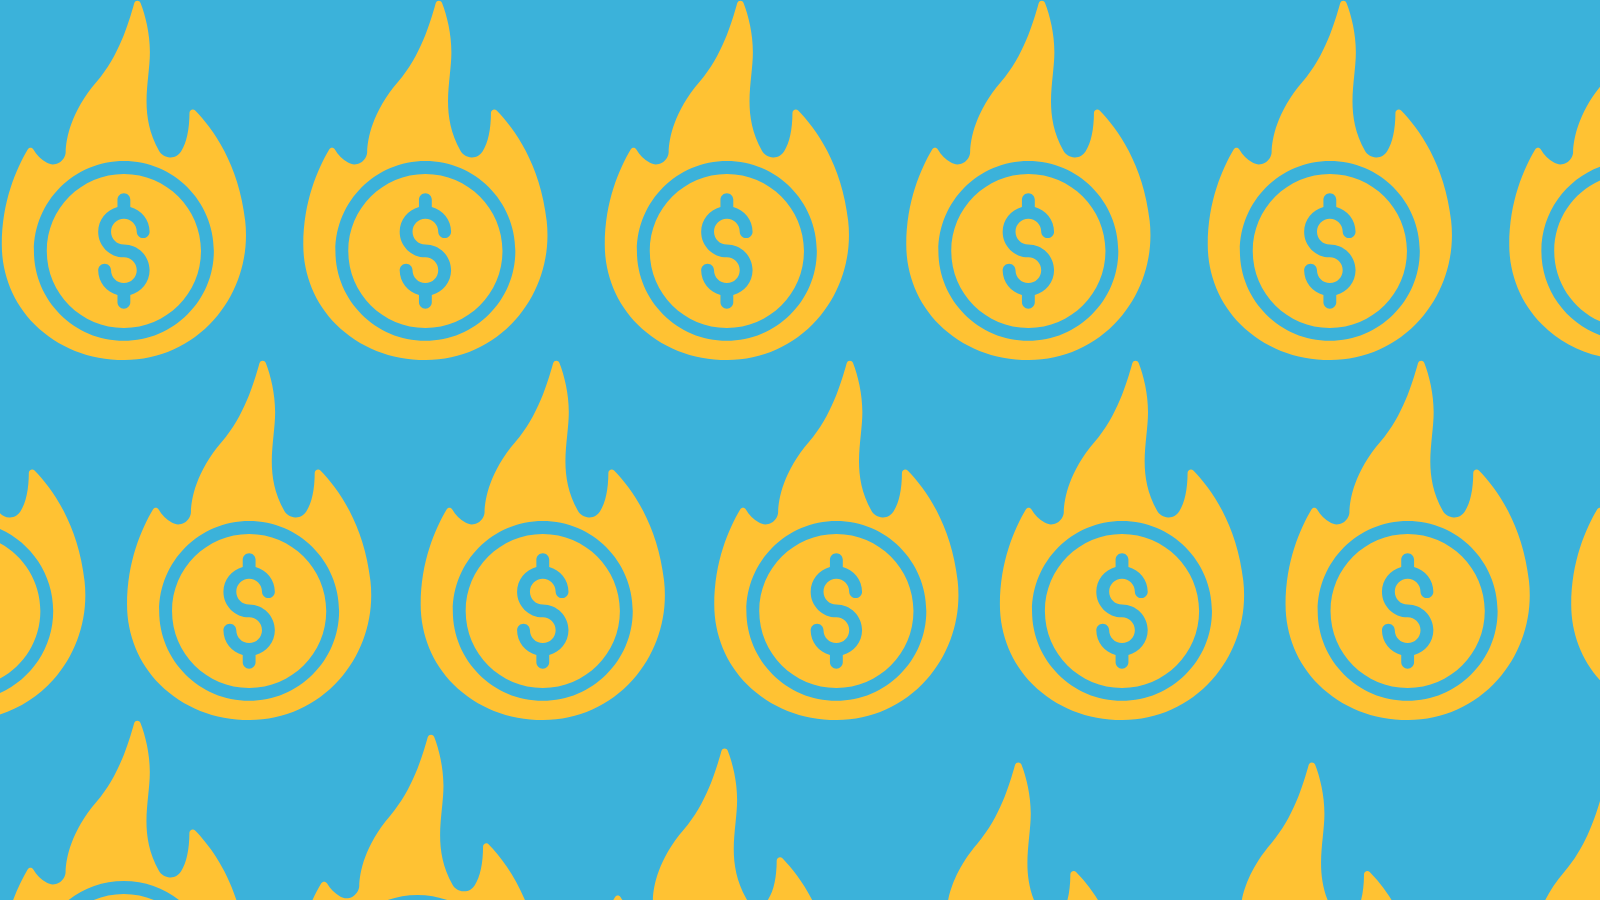 A repeating pattern of fire icons with dollar signs inside of them